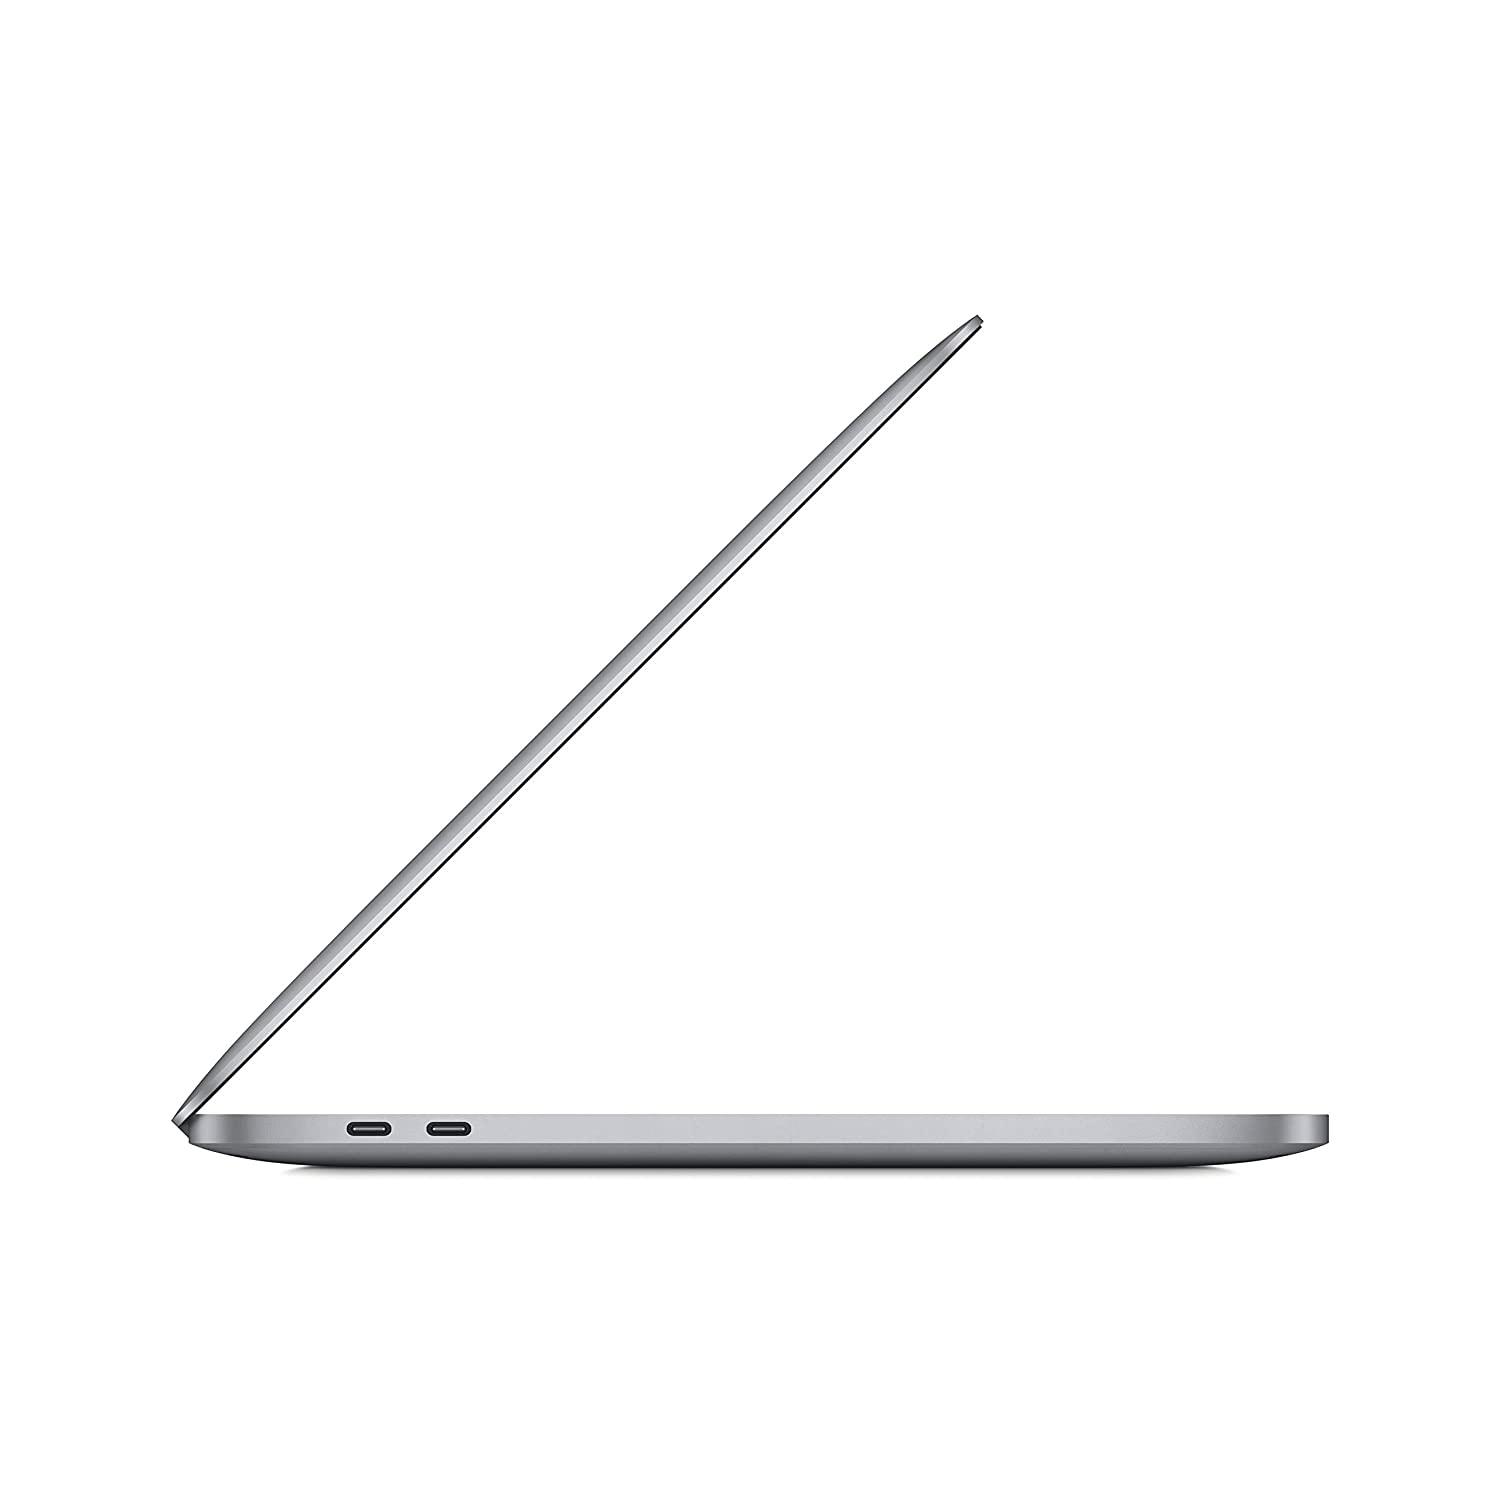 2022 Apple MacBook Air Laptop with M2 chip: 13.6-inch Liquid Retina Display, 8GB RAM, 256GB SSD Storage, Backlit Keyboard, 1080p FaceTime HD Camera. Works with iPhone and iPad; Space Gray